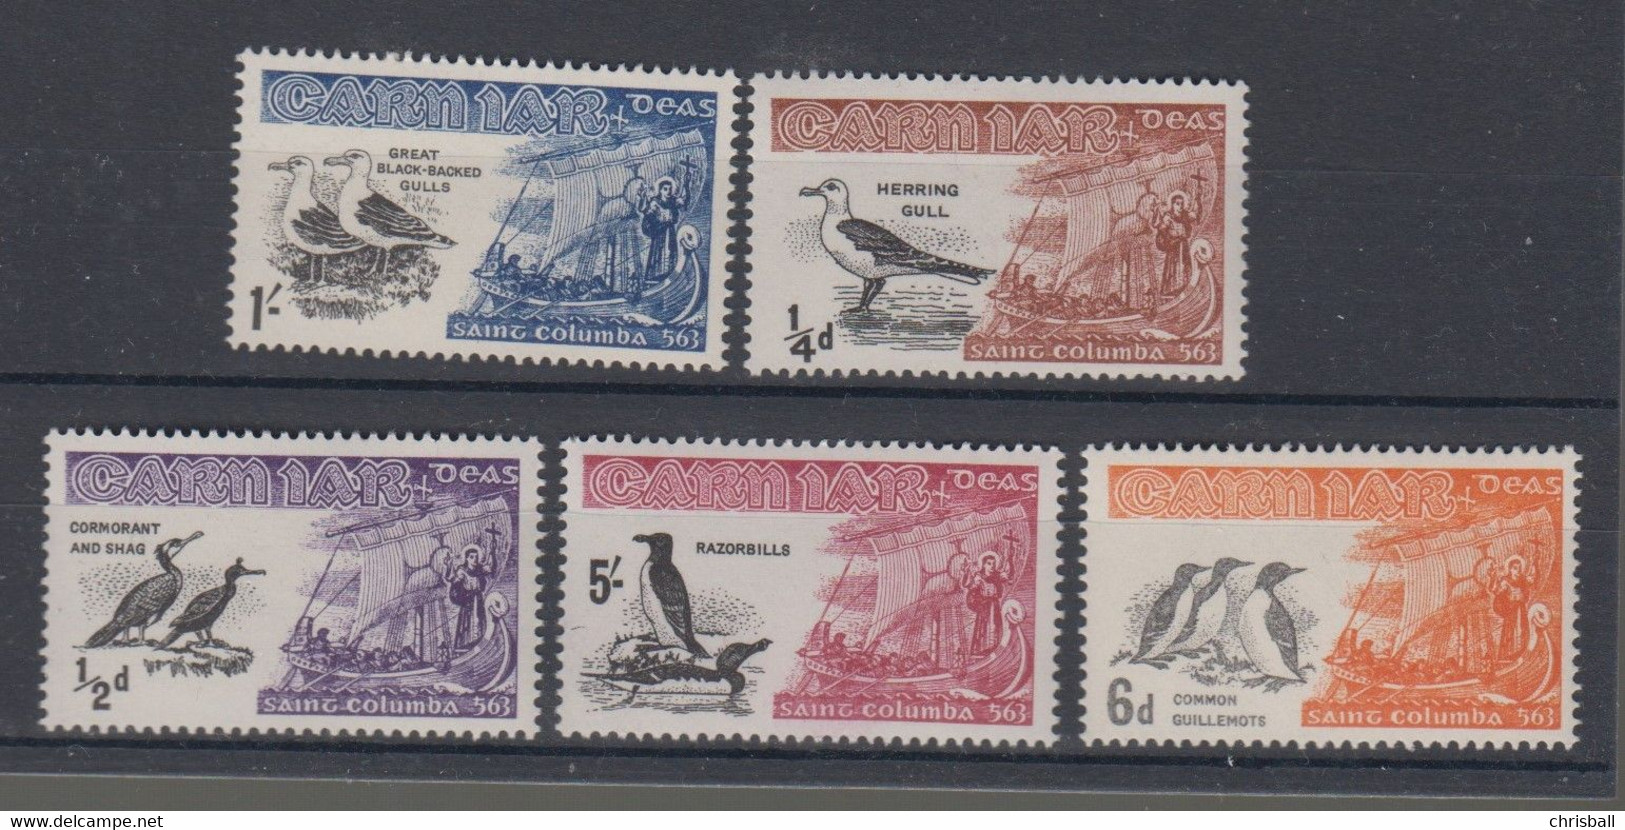 Carniar Sea Birds Selection 5 Values Unmounted Mint - Local Issues